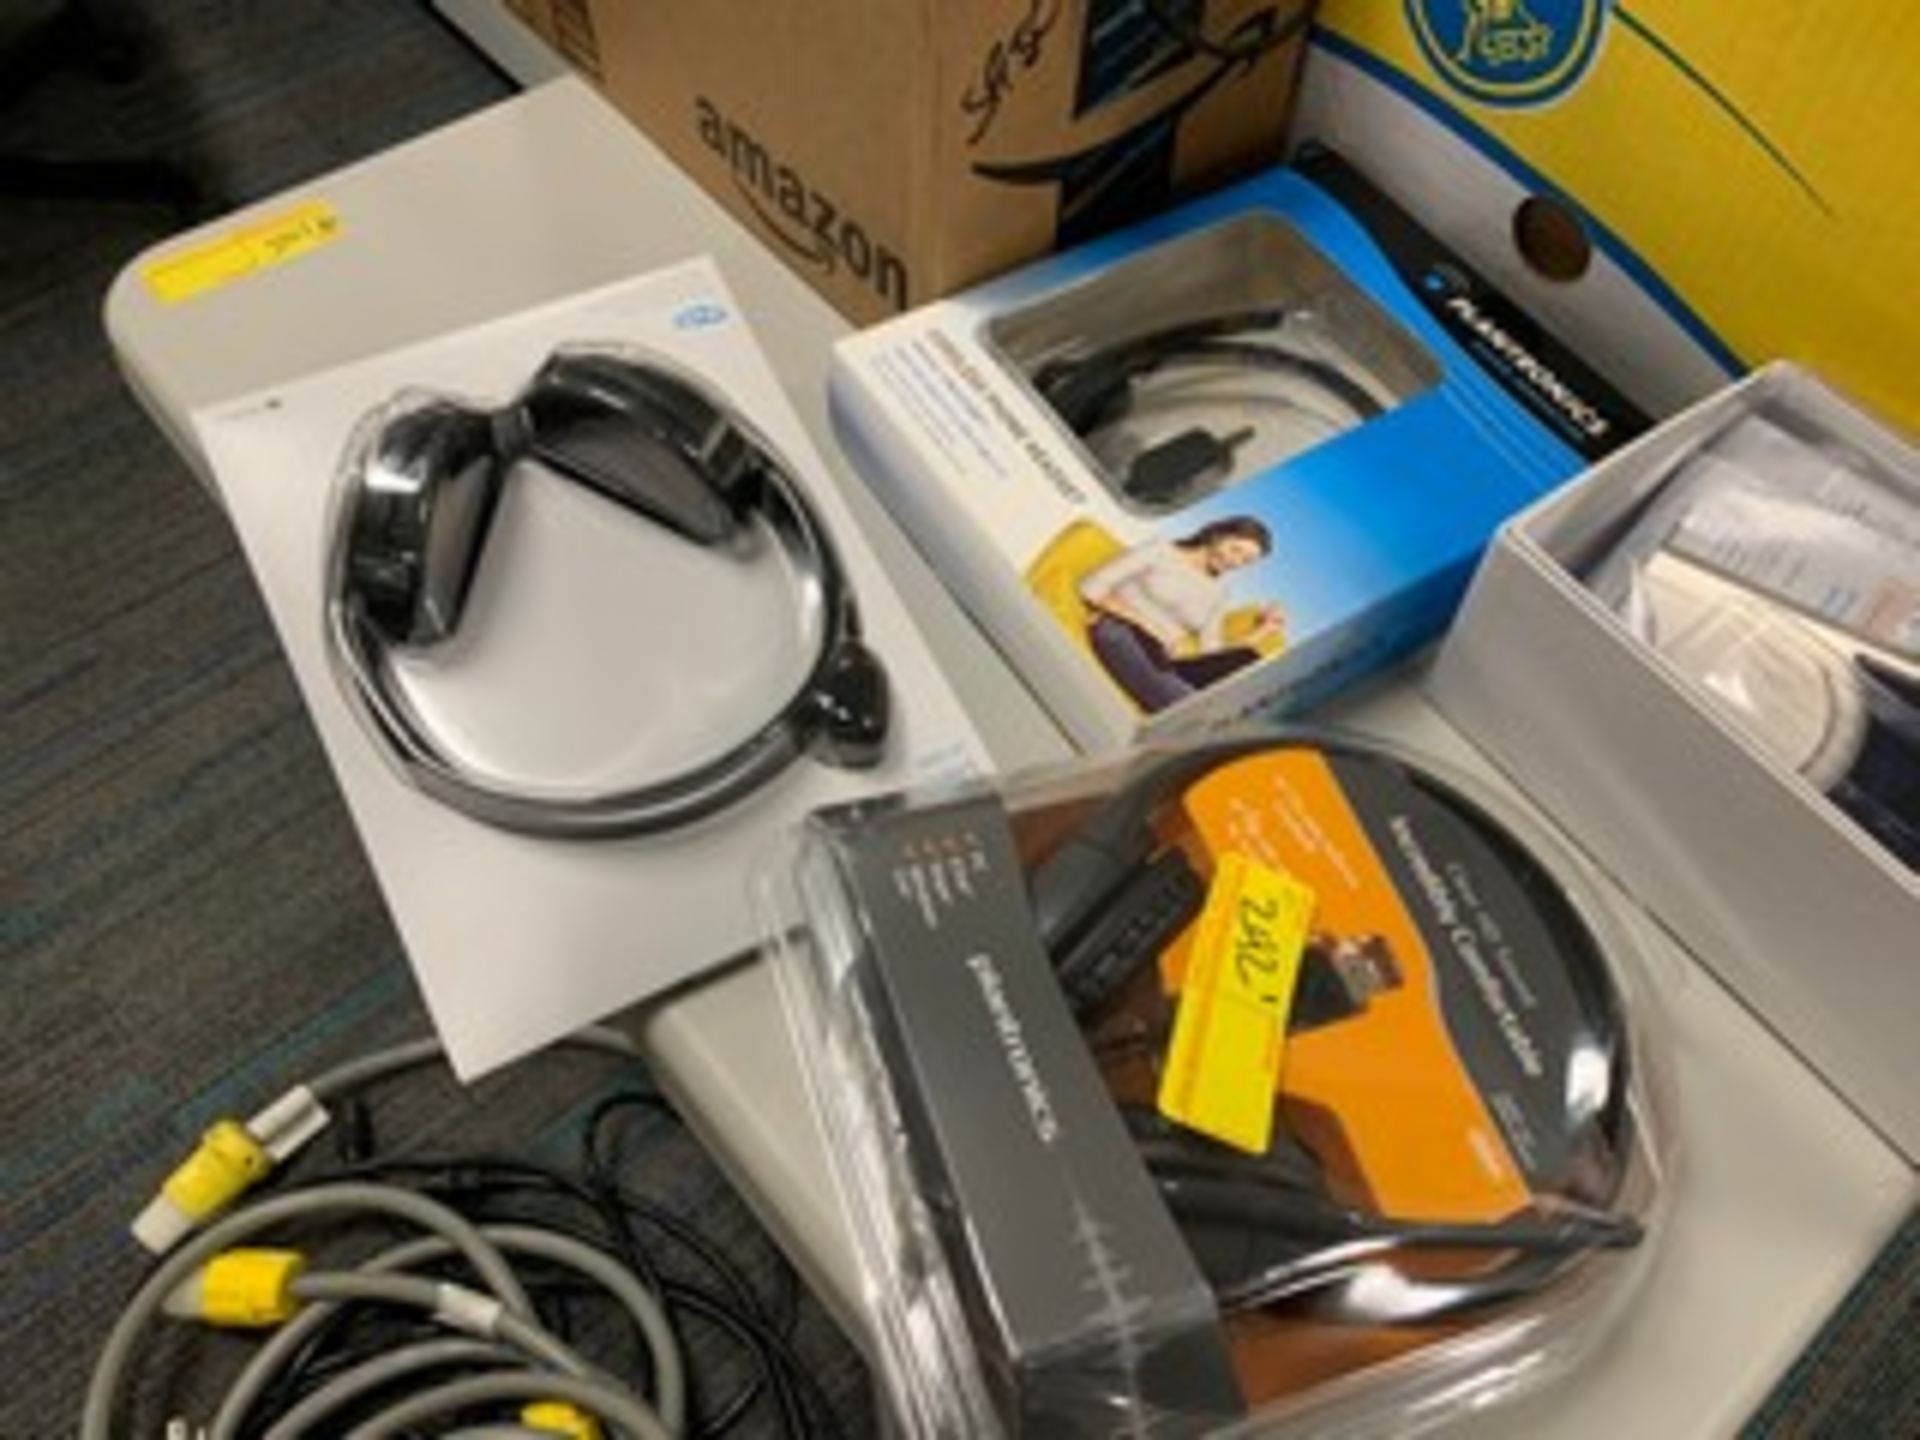 HEADSETS (NEW IN BOX)